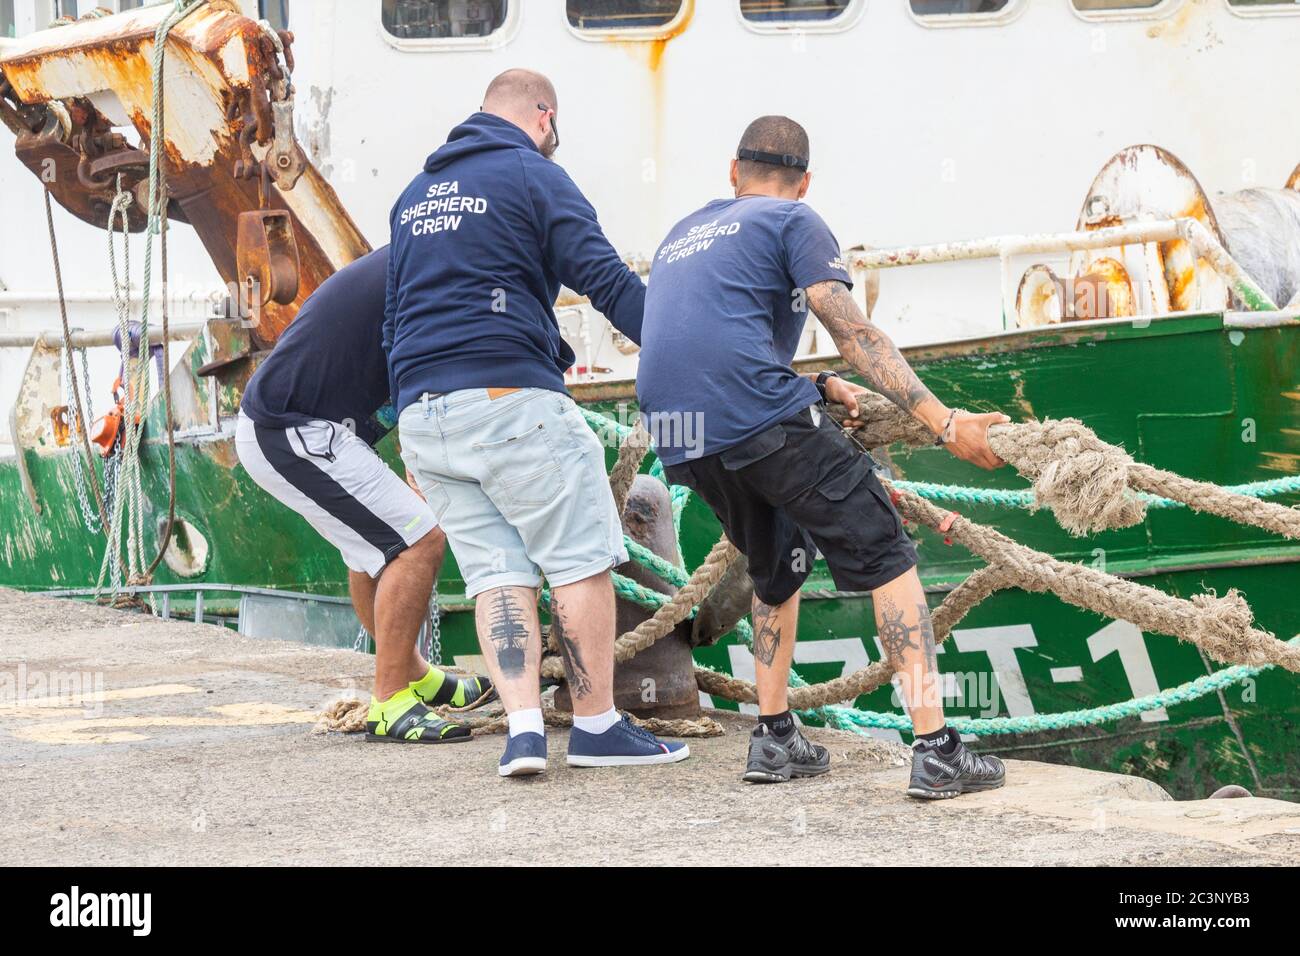 Las Palmas, Gran Canaria, Canary Islands, Spain. 21st June, 2020. Crew  casting off mooring ropes: Following three months in lockdown on Gran  Canaria, Sea Shepherd ship "Bob Barker" sets sail to investigate